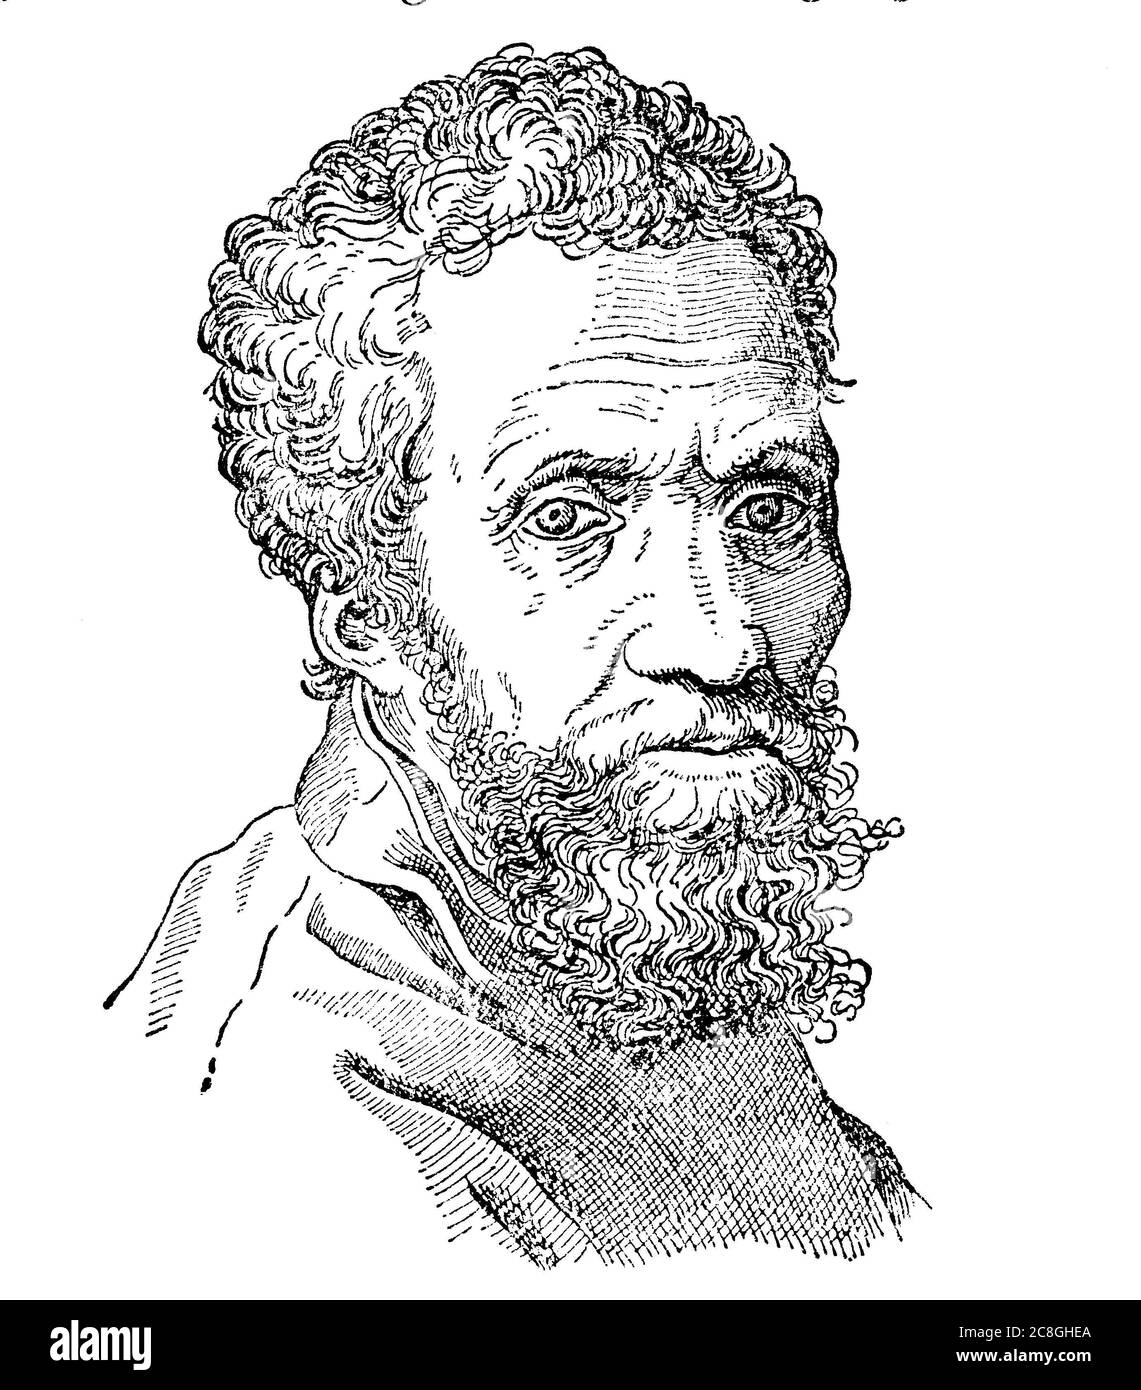 Michelangelo di Lodovico Buonarroti Simoni or more commonly known by his first name Michelangelo, Italian sculptor, painter, architect and poet of Stock Photo